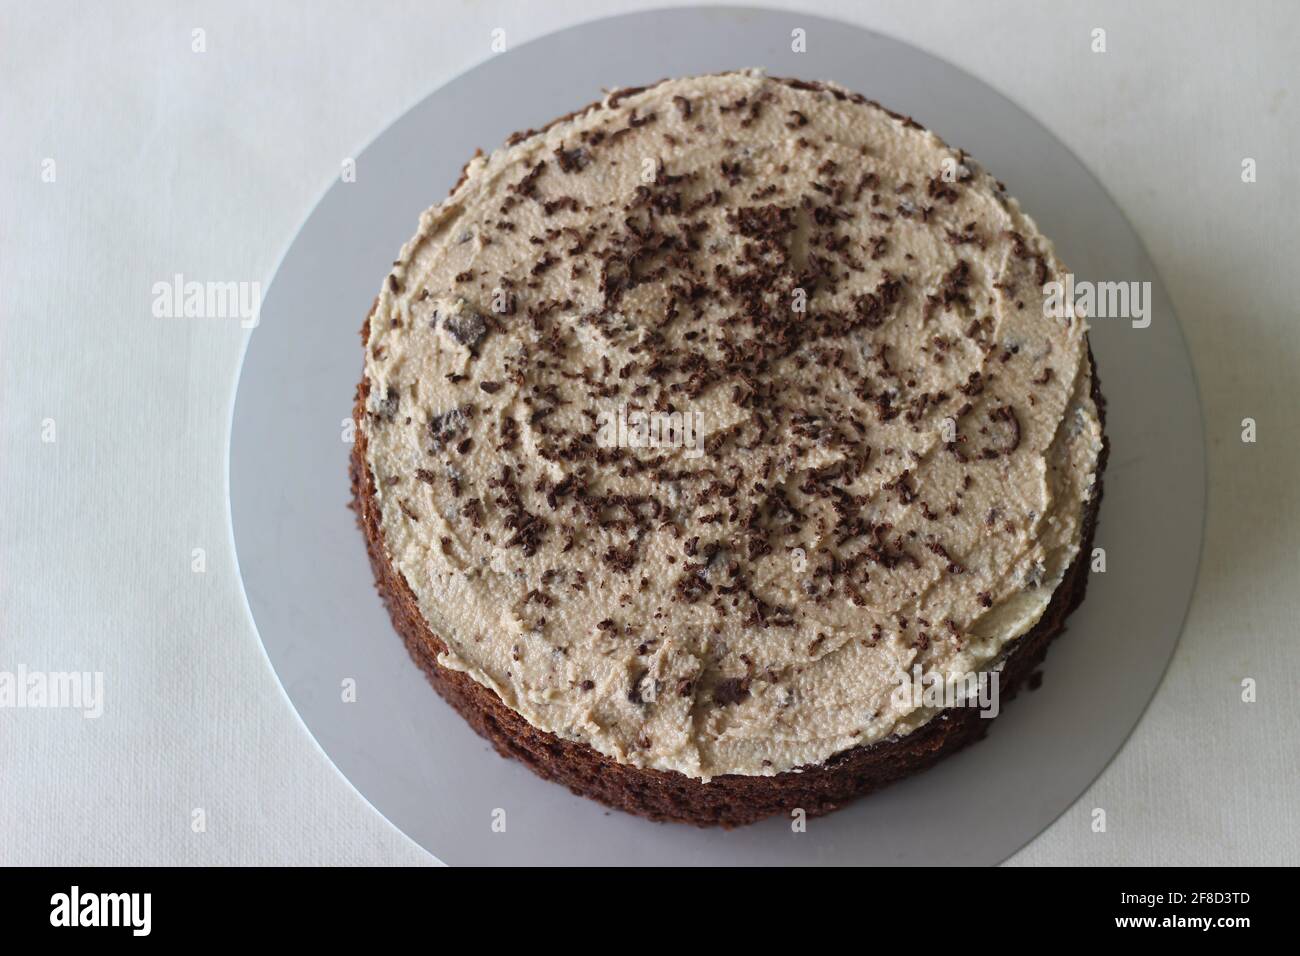 Chocolate cake with vanilla butter icing mixed with chocolate as the topping. Shot on white background. Stock Photo